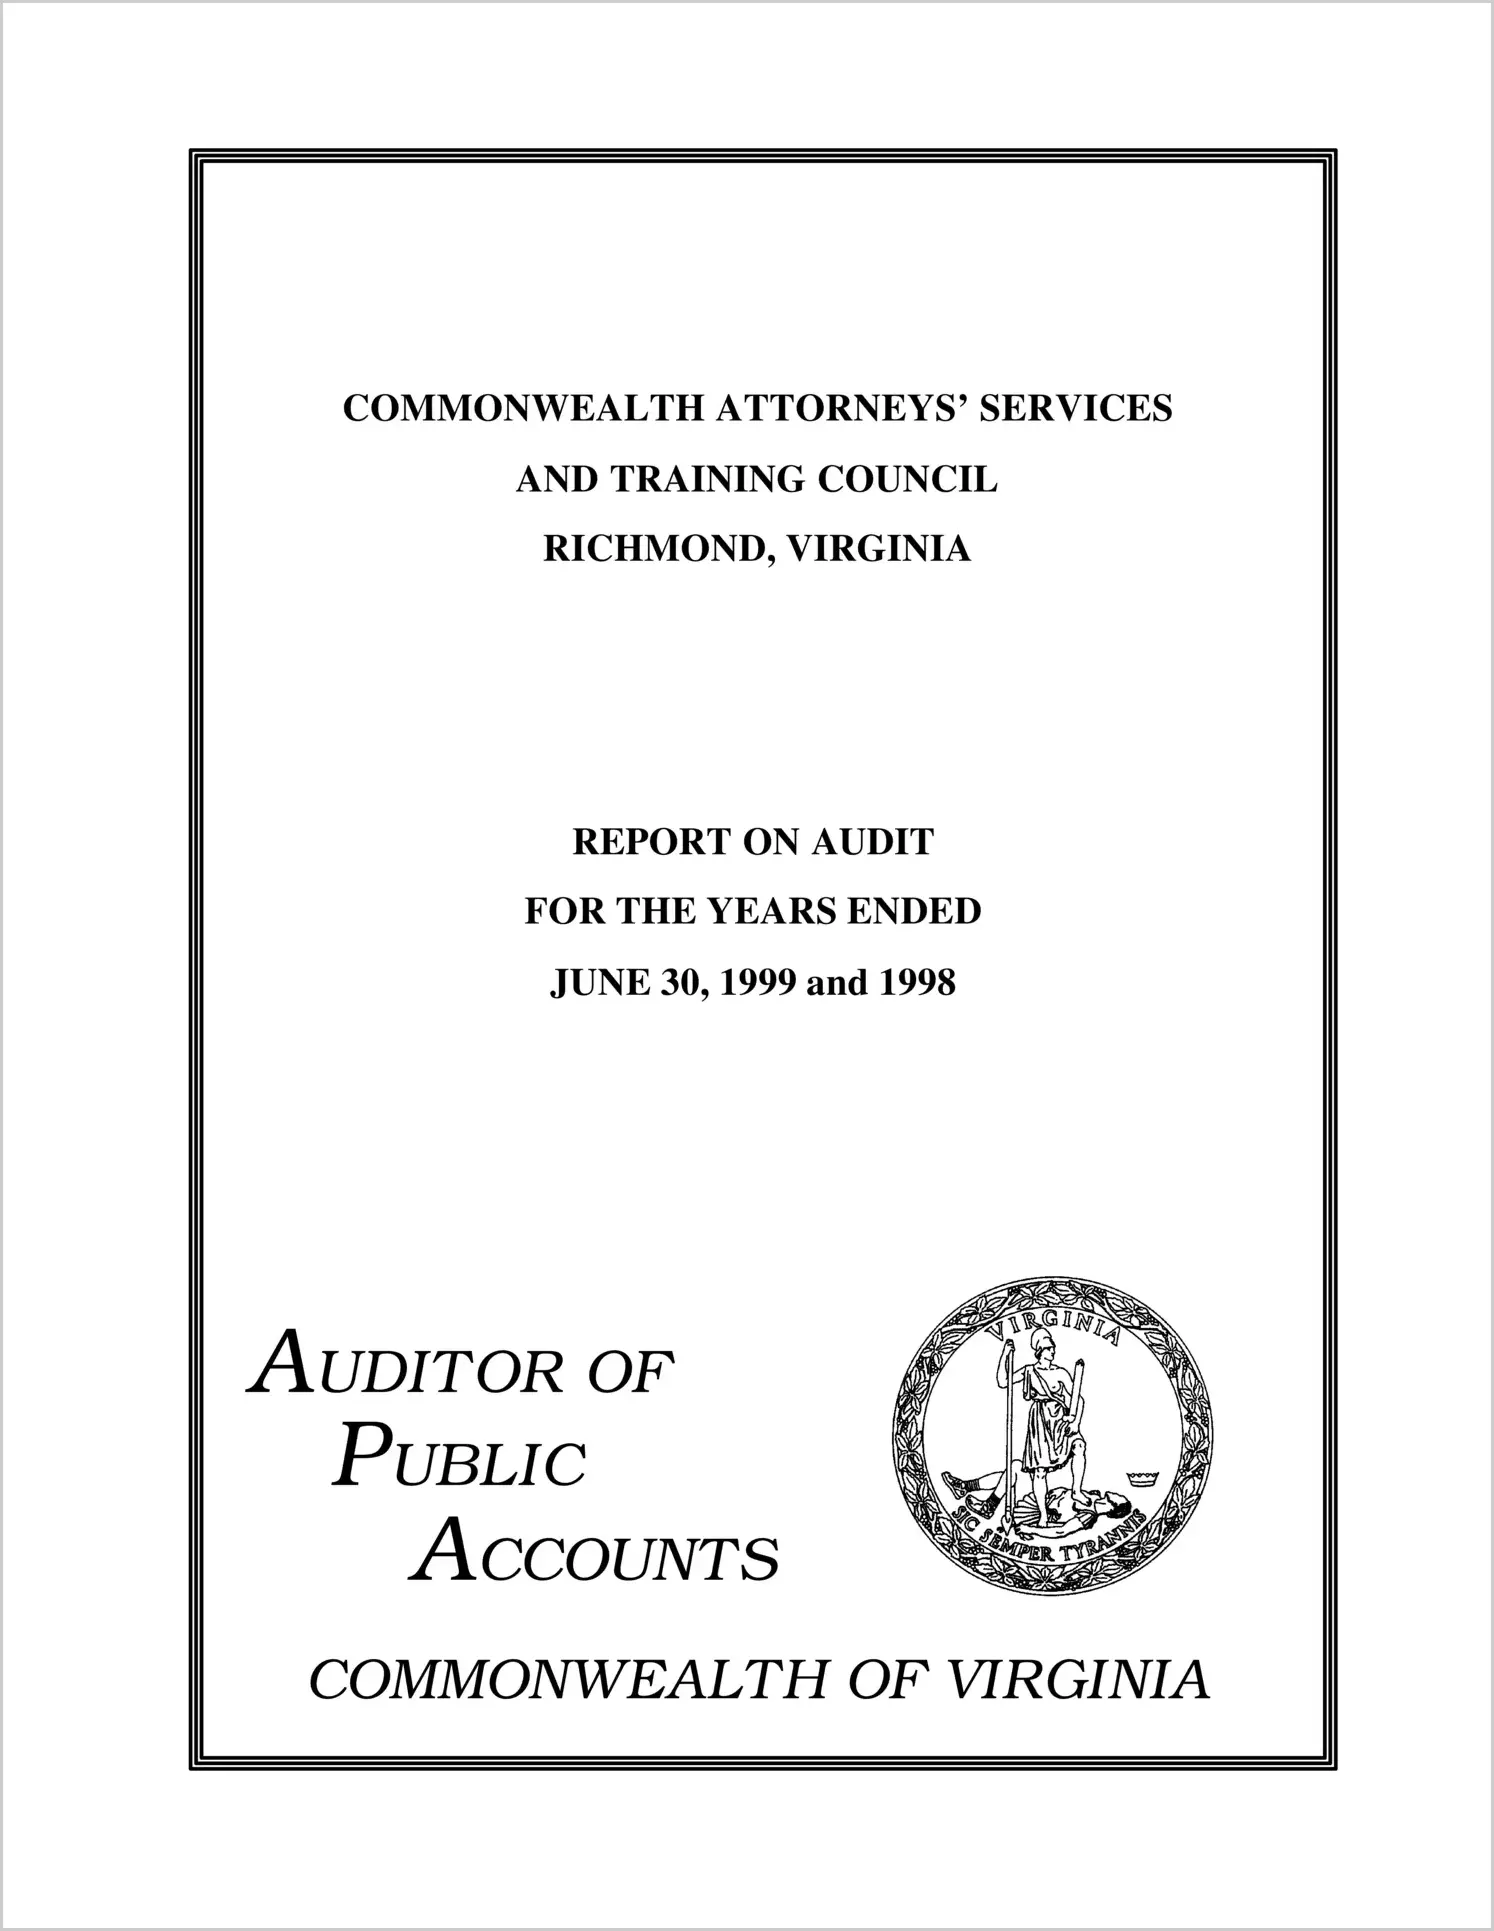 Commonwealth Attorney's Services and Training Council for the years ended June 30, 1999 and 1998